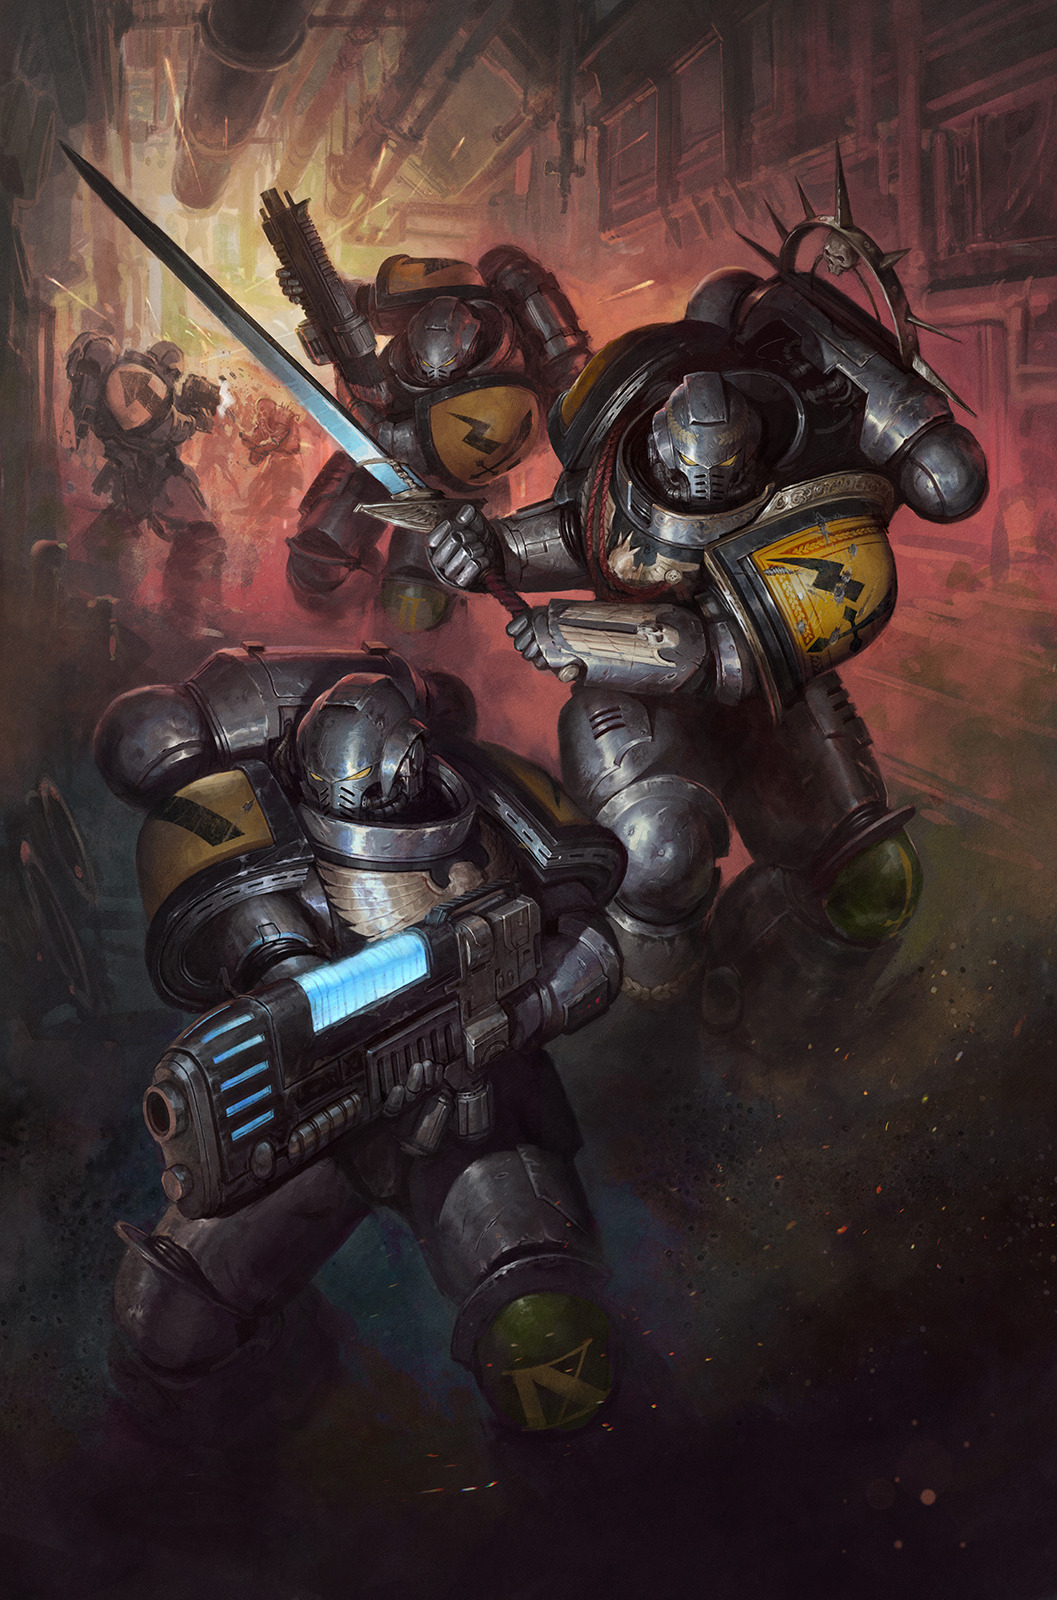 art-of-thomas-elliott:
“This is the cover art I did for the Warhammer 40k Novella, Blade Oath. This was one of the first times I painted space marines for an official Games Workshop product.
”
Silver Templars by Thomas Elliott